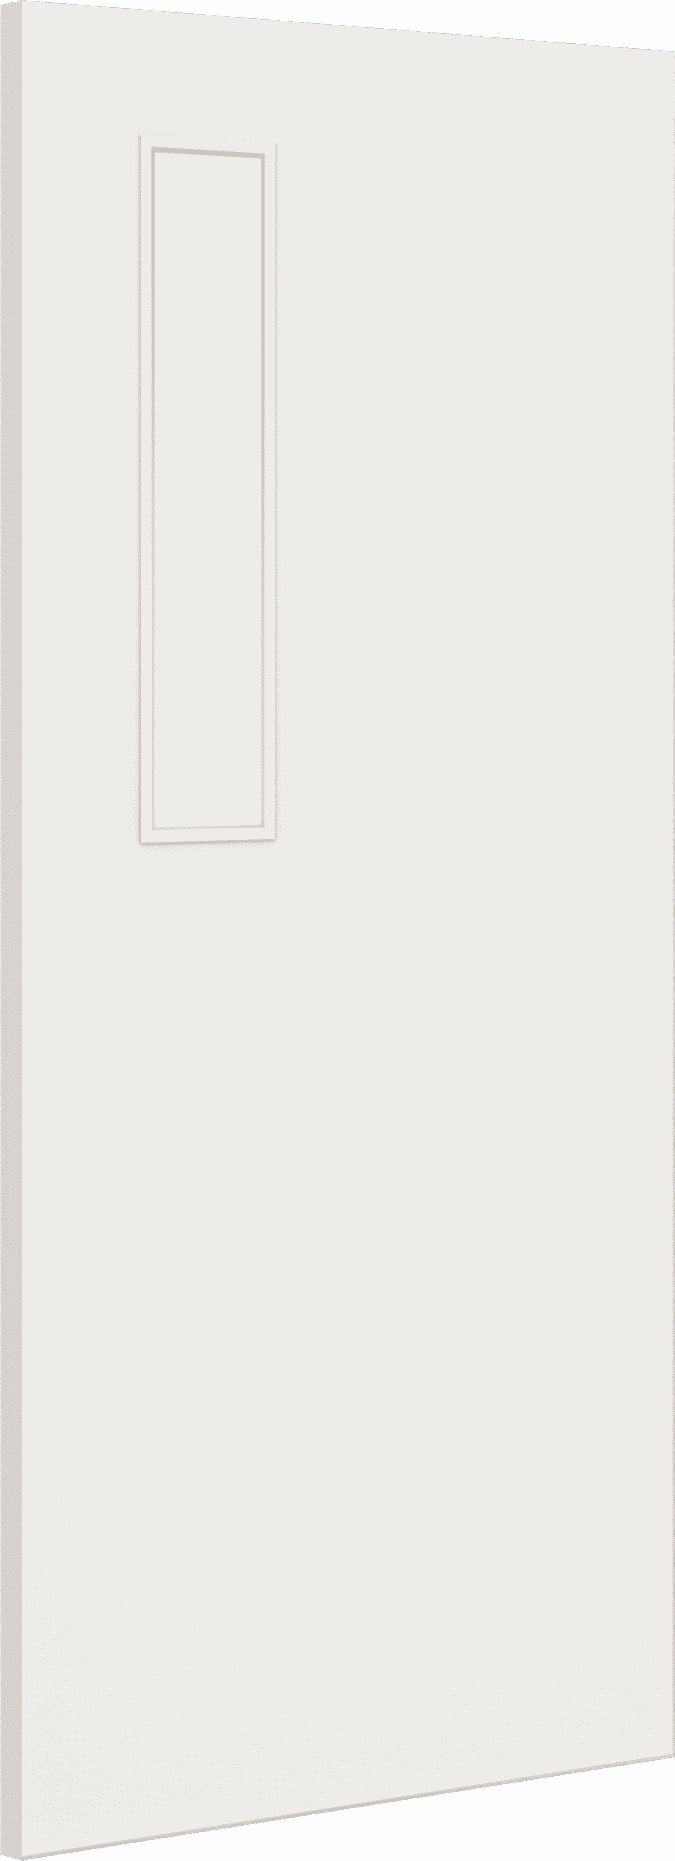 2040mm x 726mm x 44mm Architectural Paint Grade White 08 Frosted Glazed Fire Door Blank